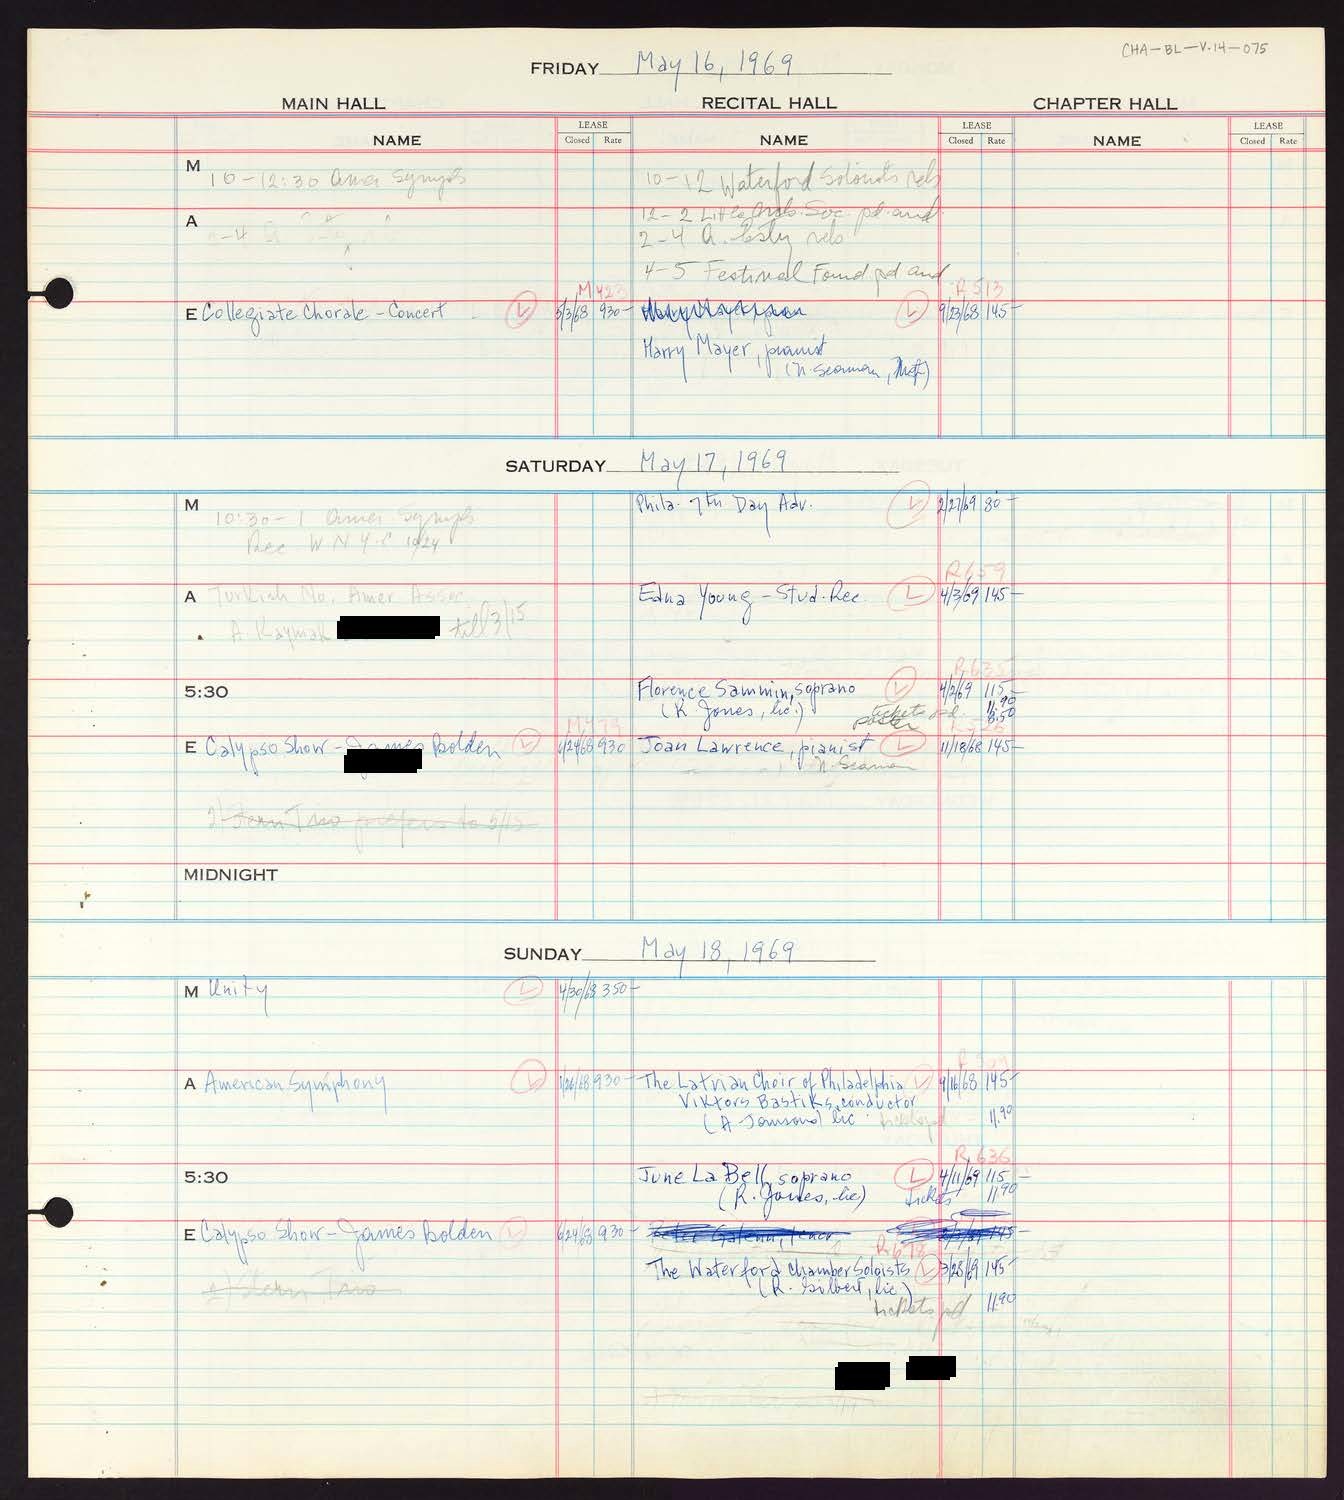 Carnegie Hall Booking Ledger, volume 14, page 75